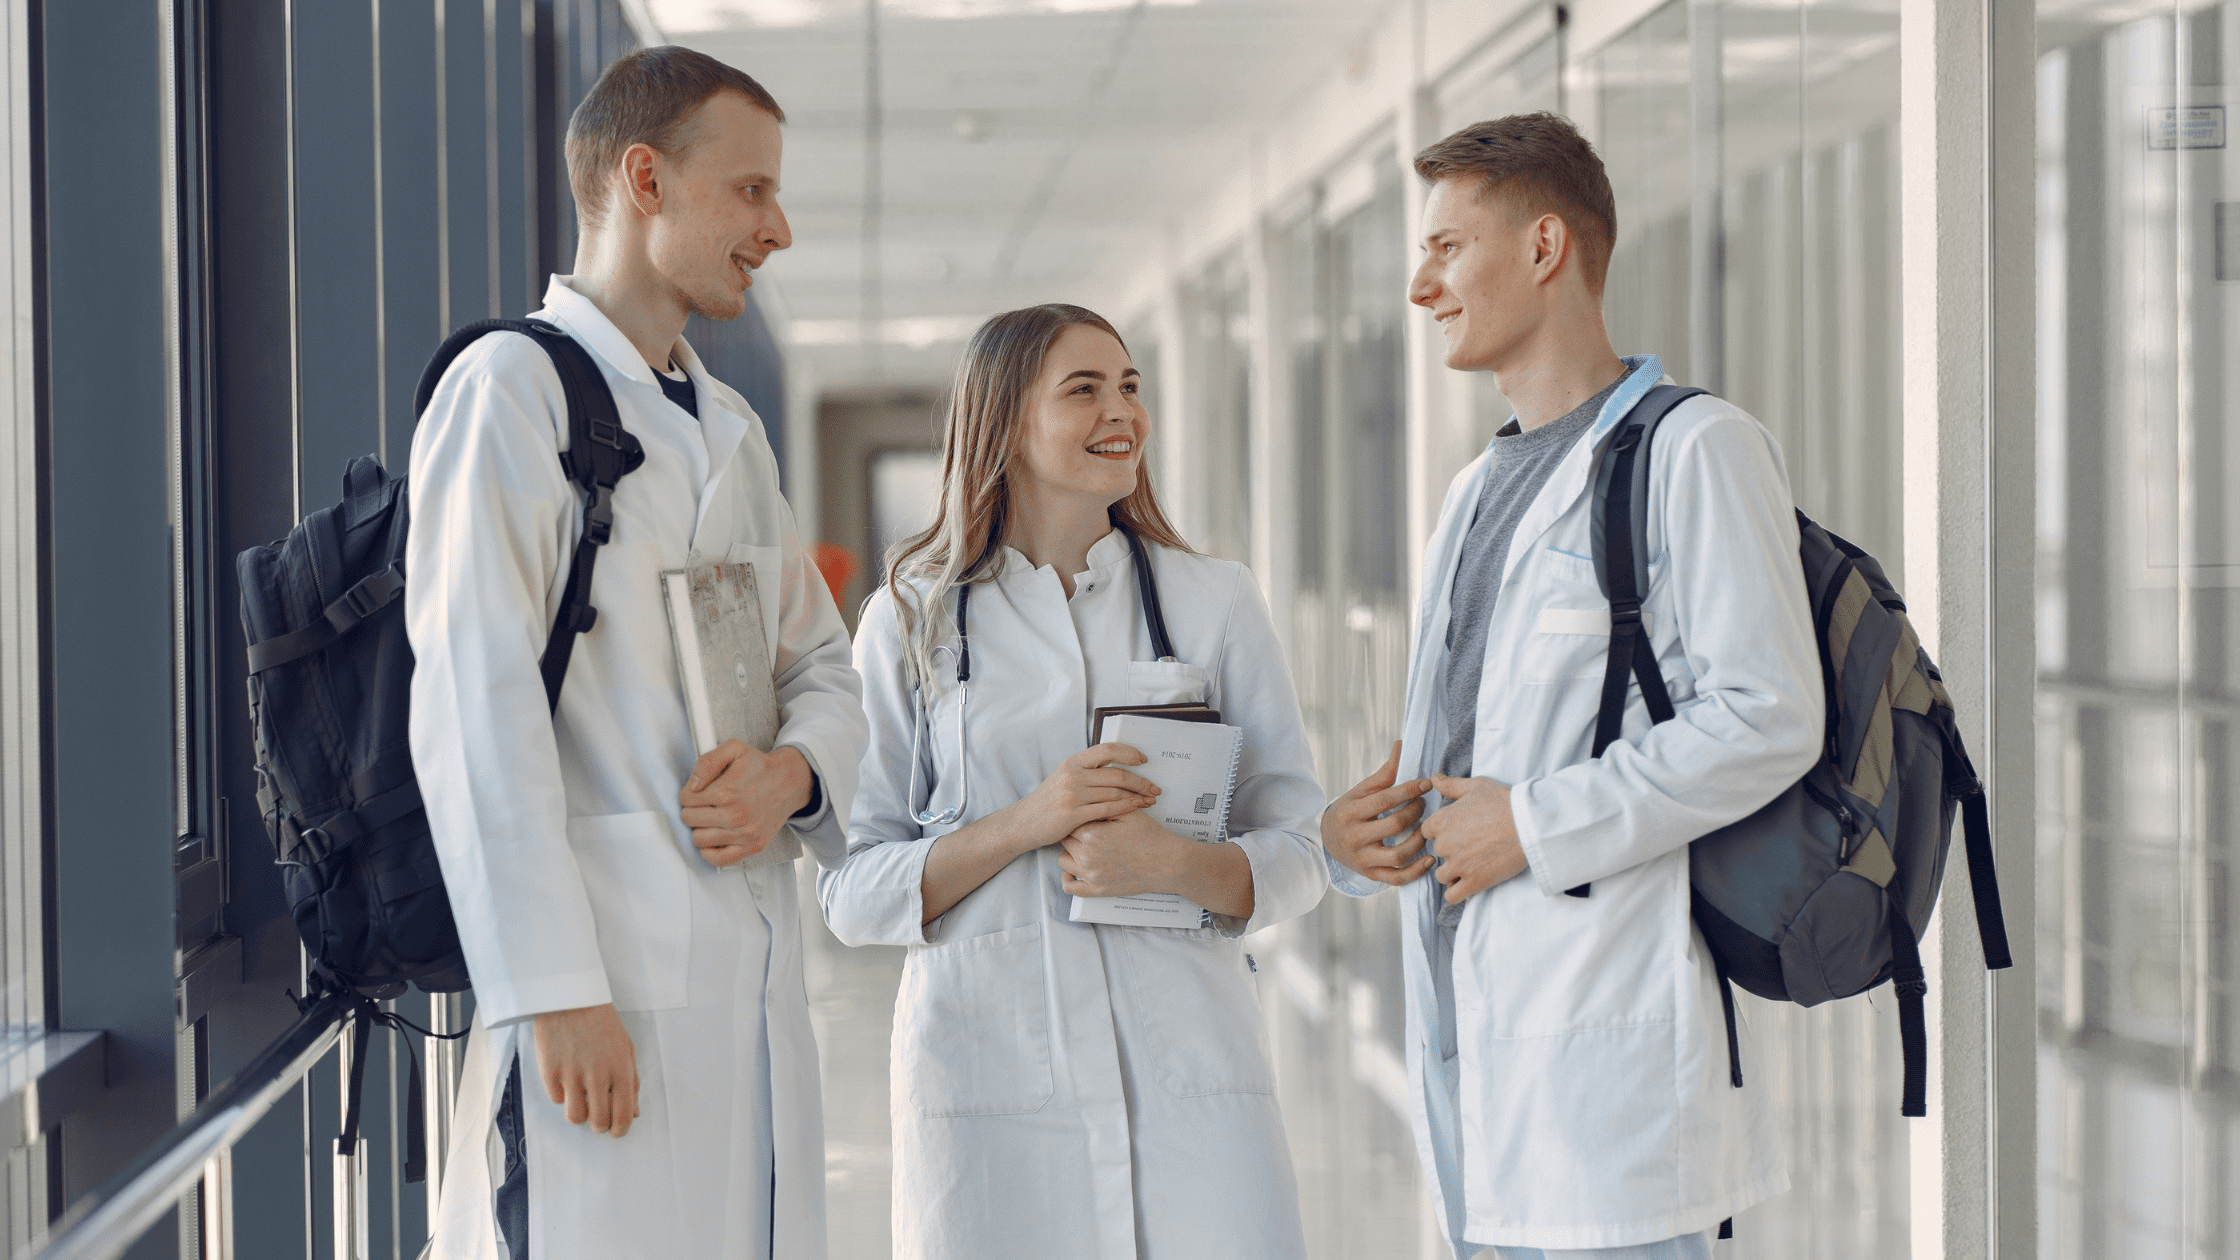 Three students that made it to medical school, now what?